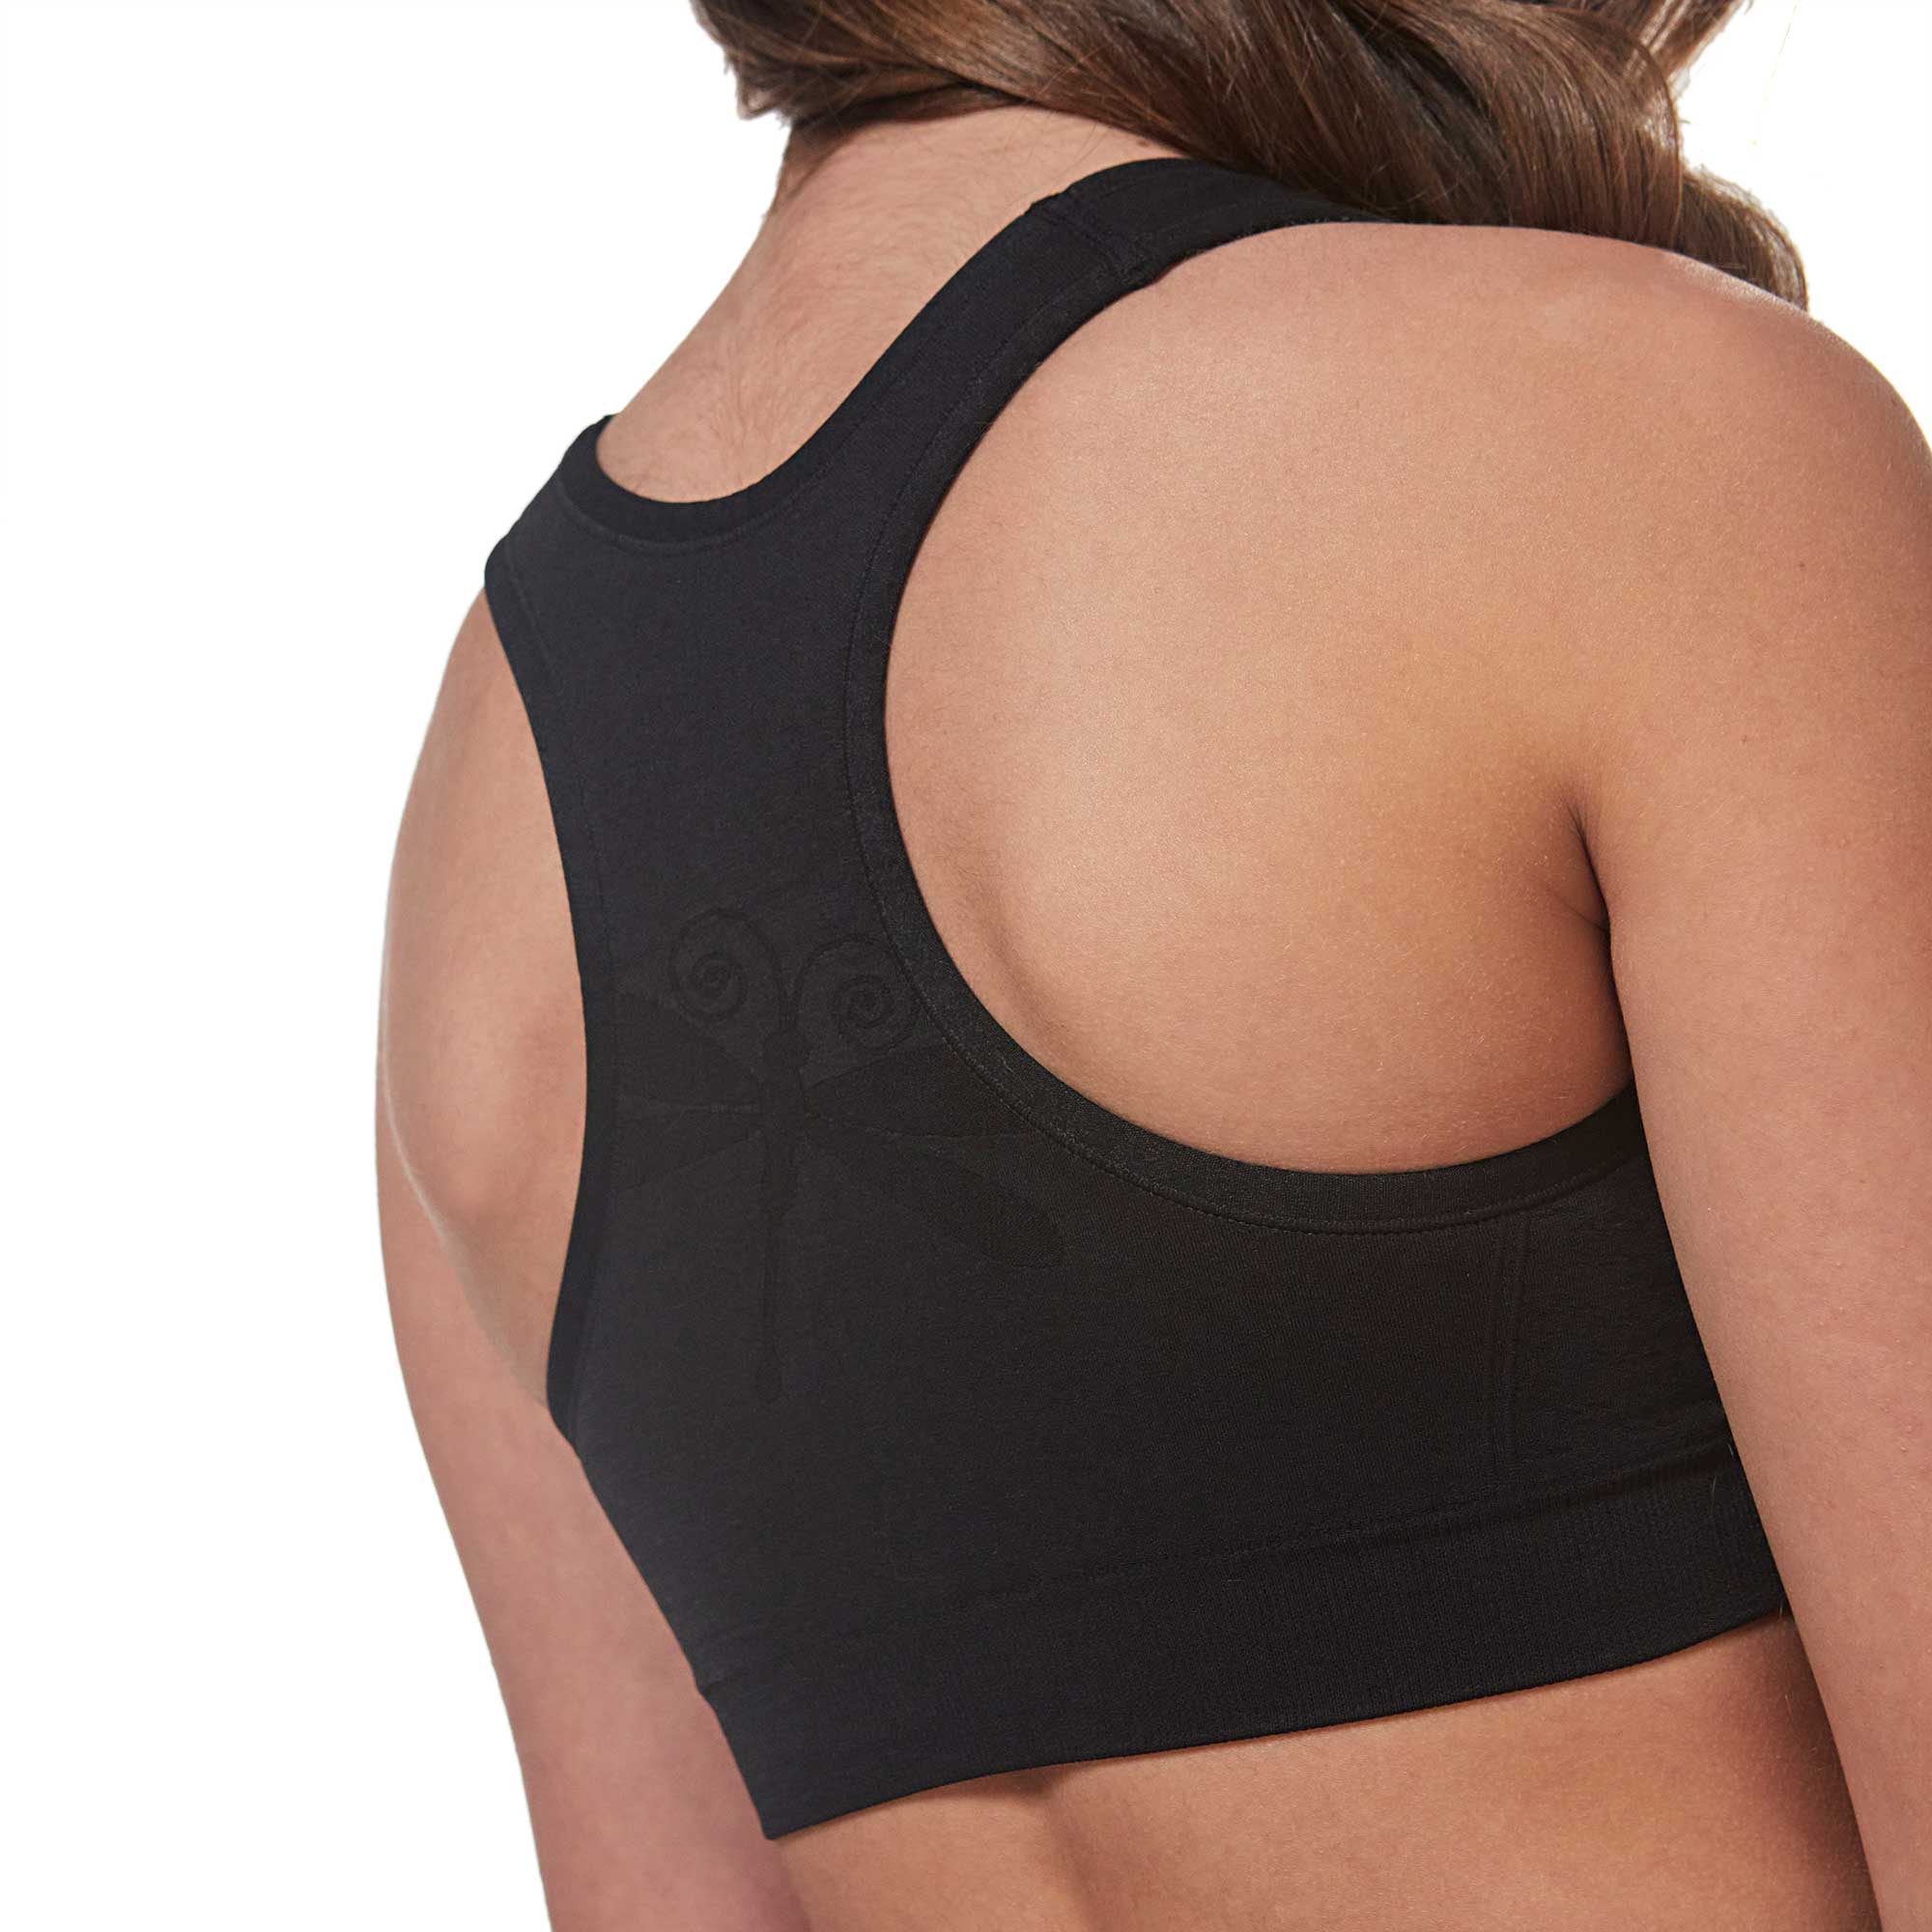 Why Racer Seamless Sports Bra Is Good for Teens?, by Dragonwing Girl